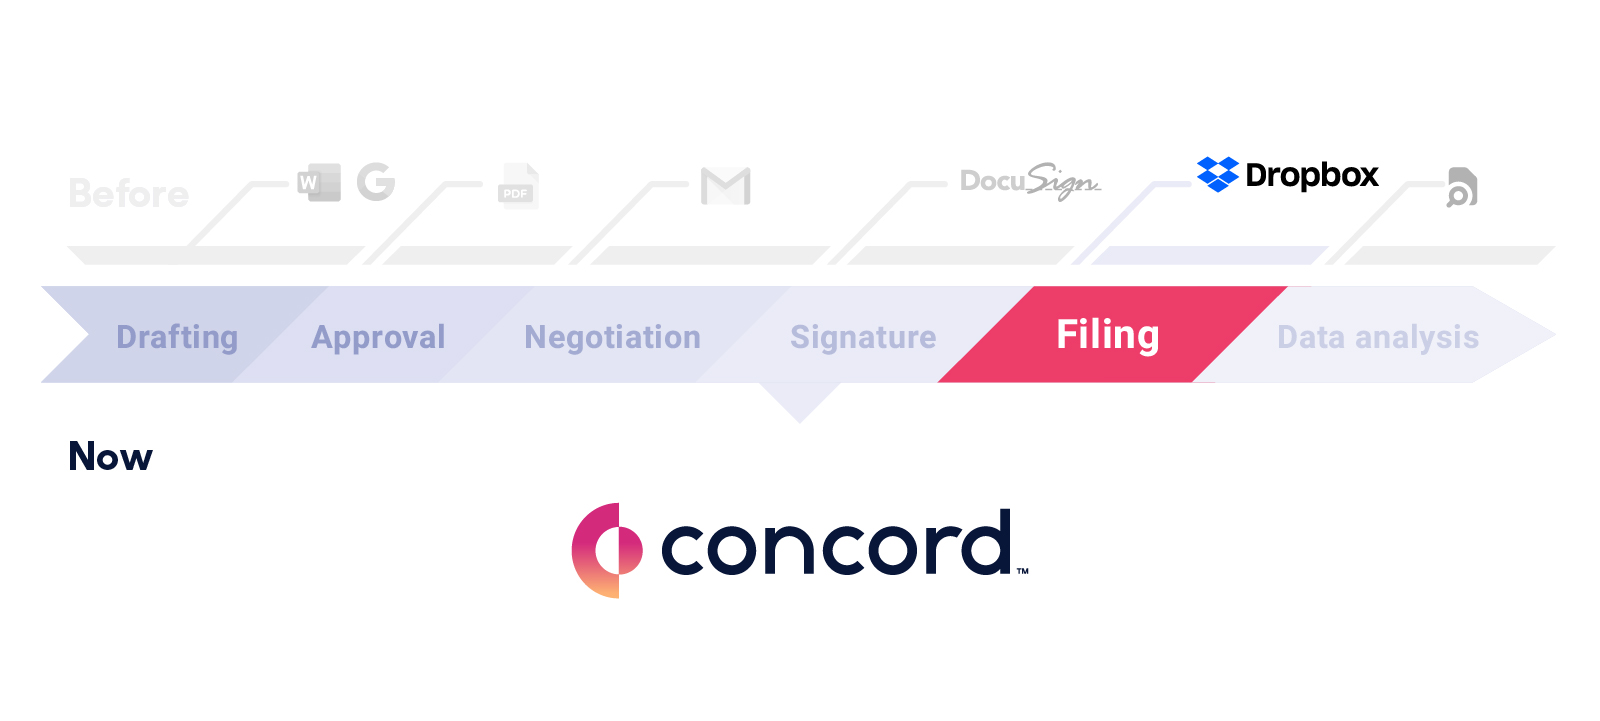 This article is about the last stage of the contract lifecycle, secure document storage and establishing a contract repository.